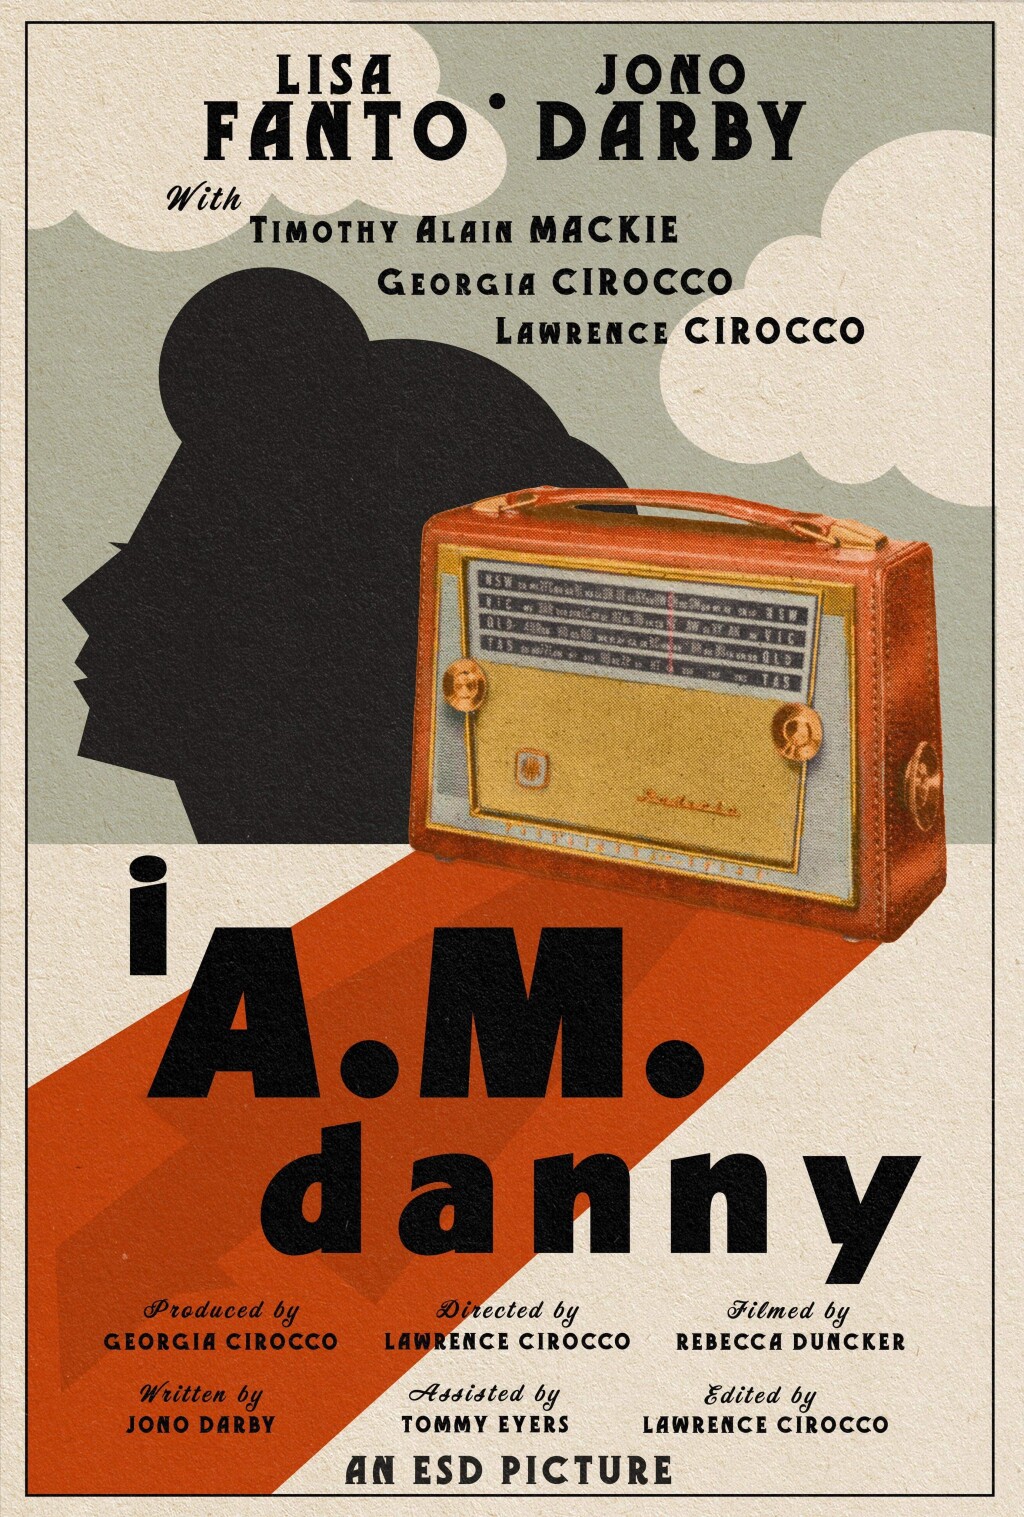 Filmposter for I A.M. Danny